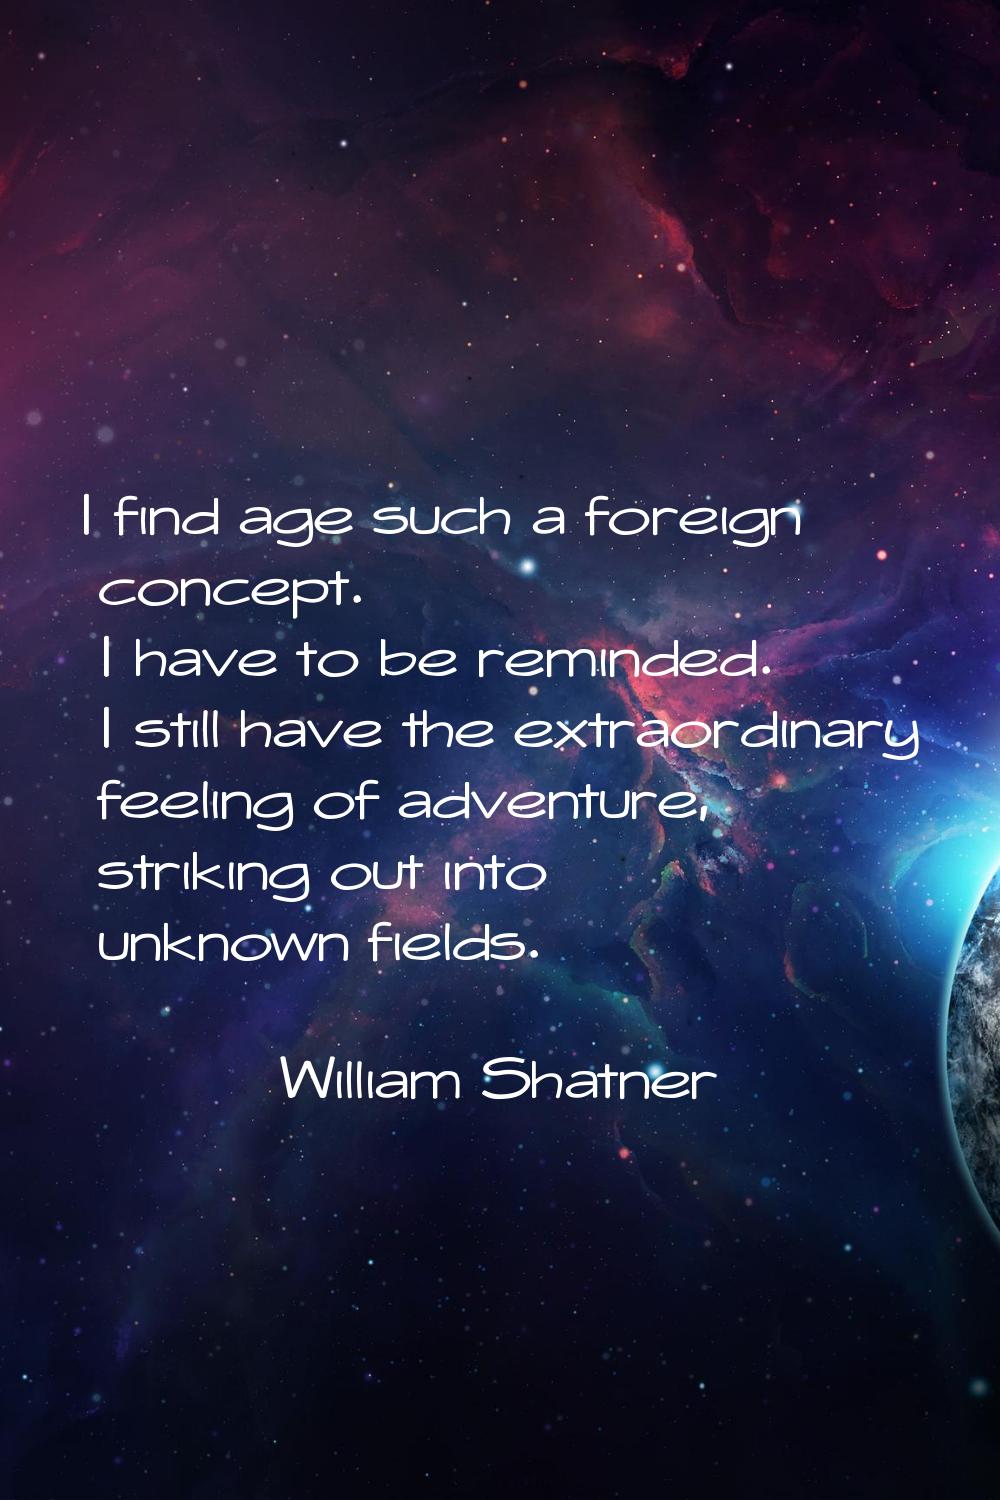 I find age such a foreign concept. I have to be reminded. I still have the extraordinary feeling of